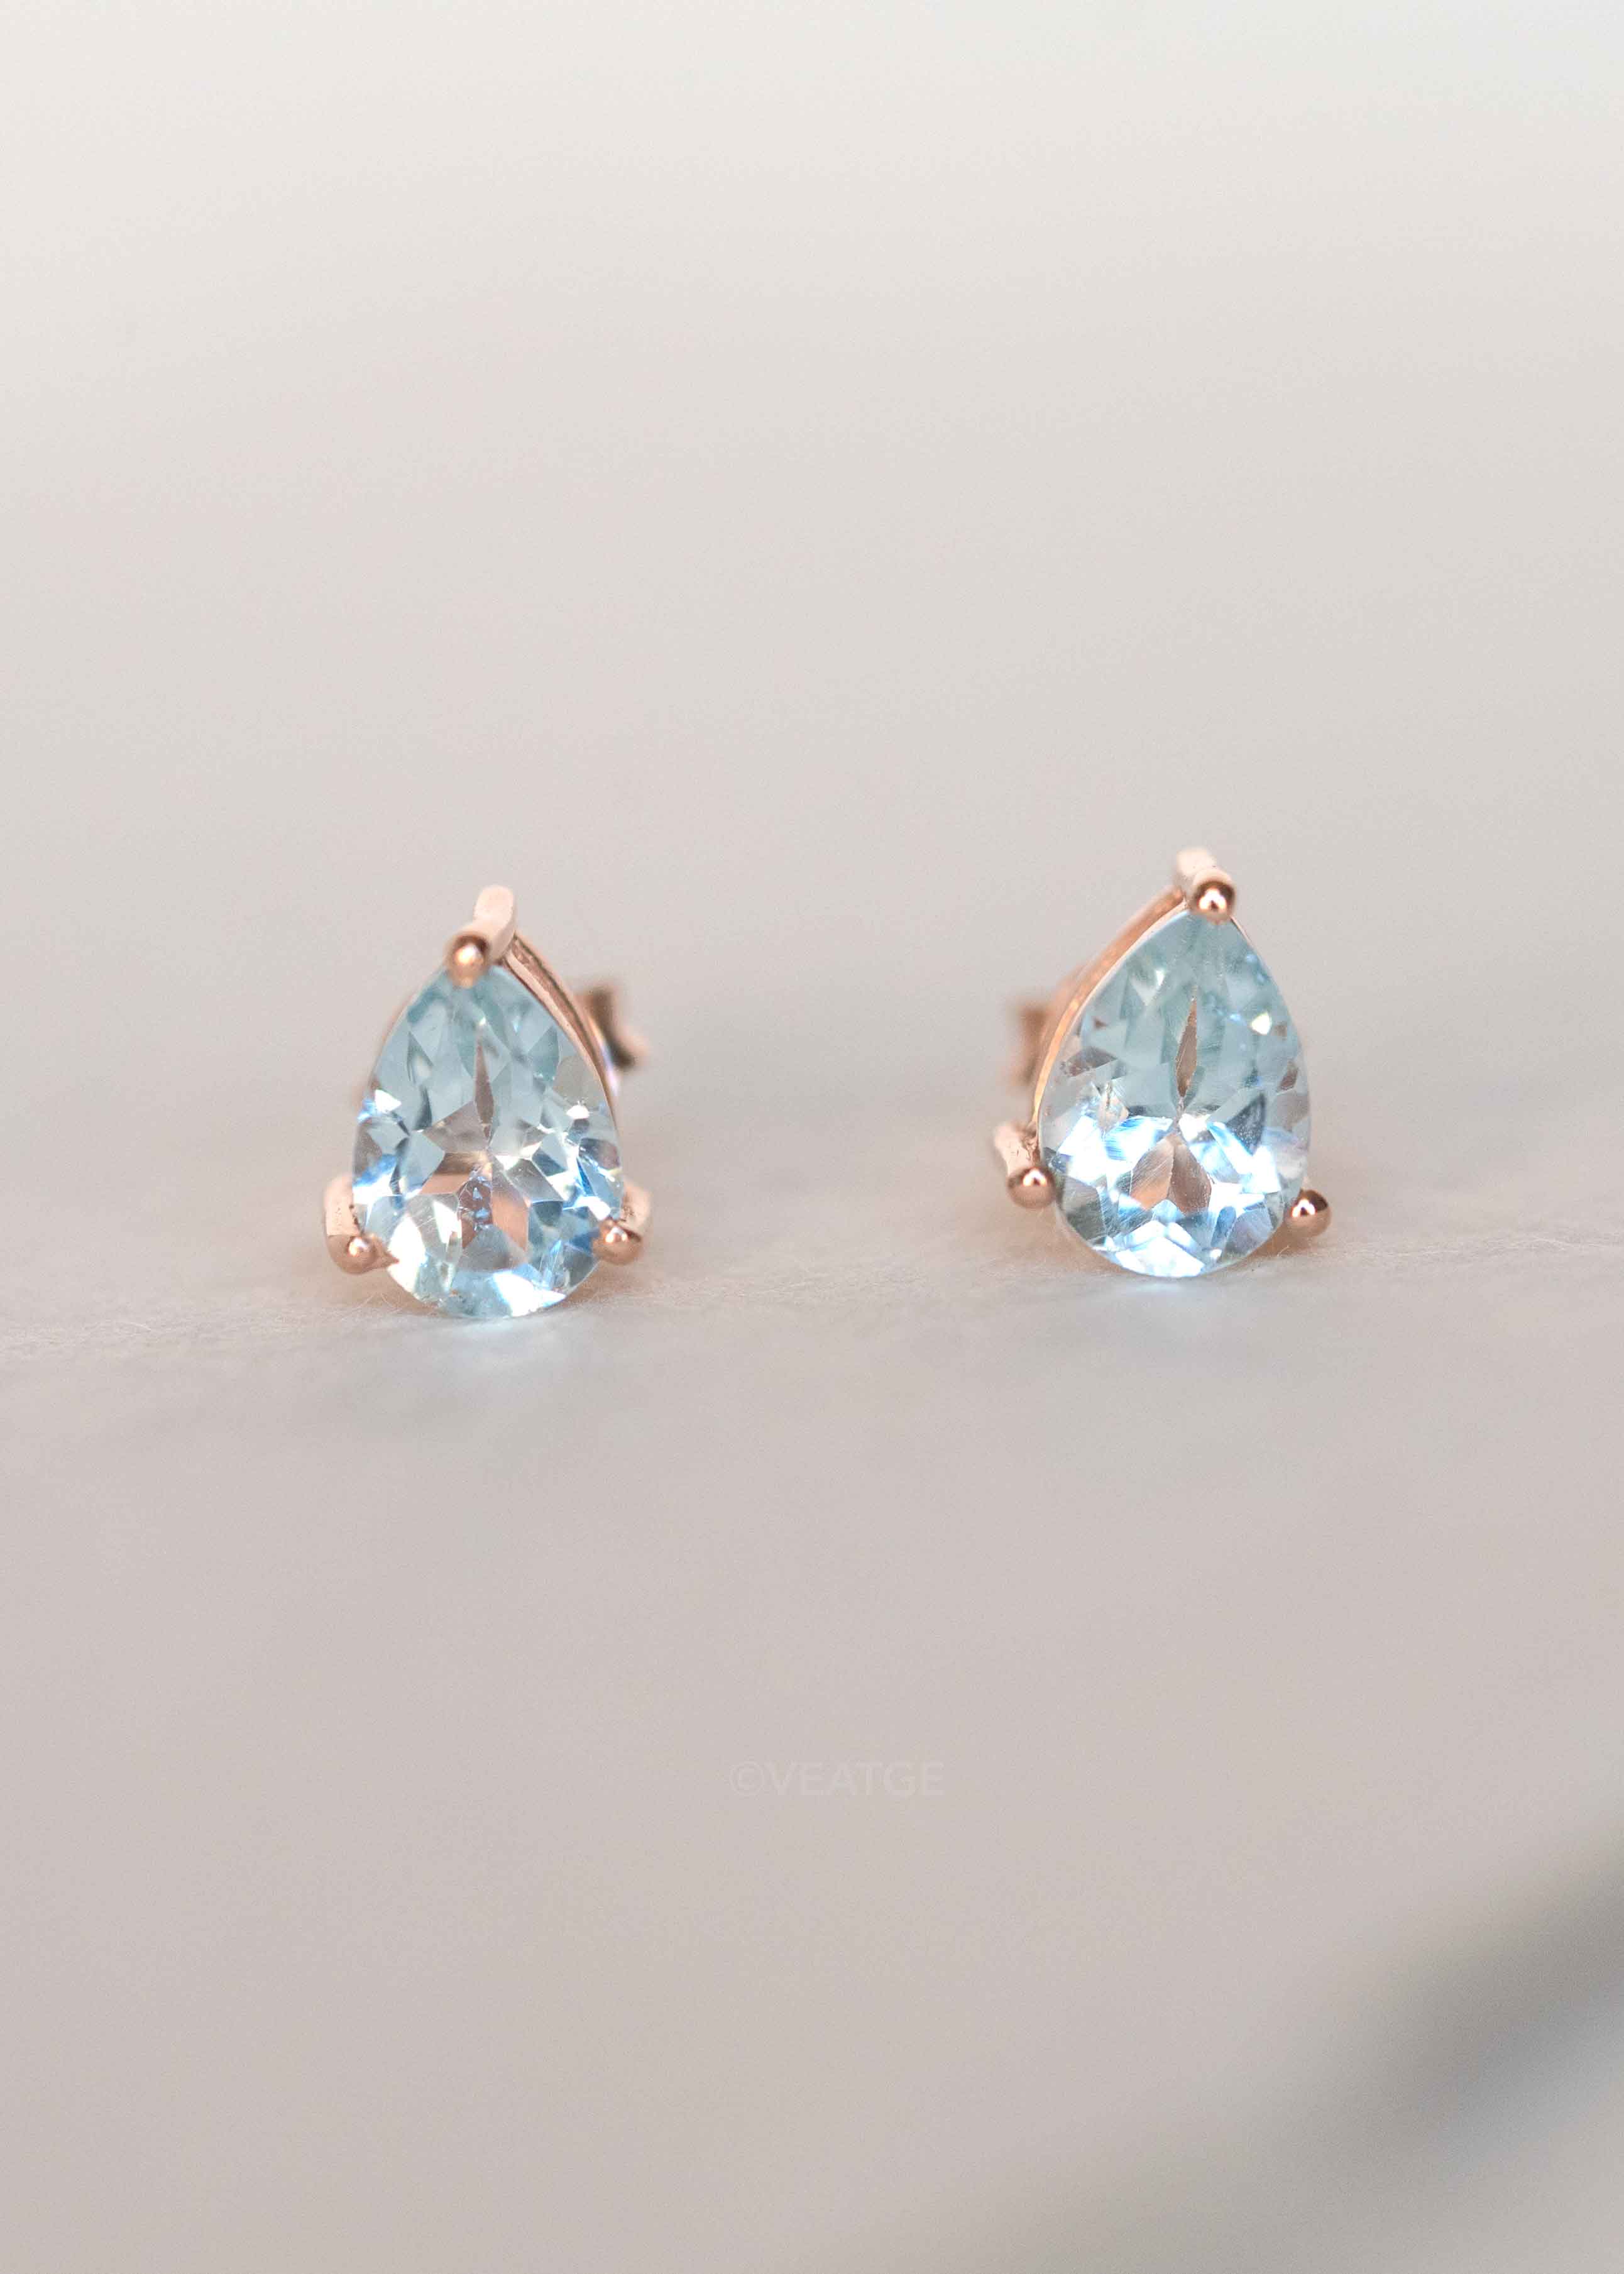 Blue Topaz Stud Earrings Second Piercing Cartilage gifts for girls bff girlfriends